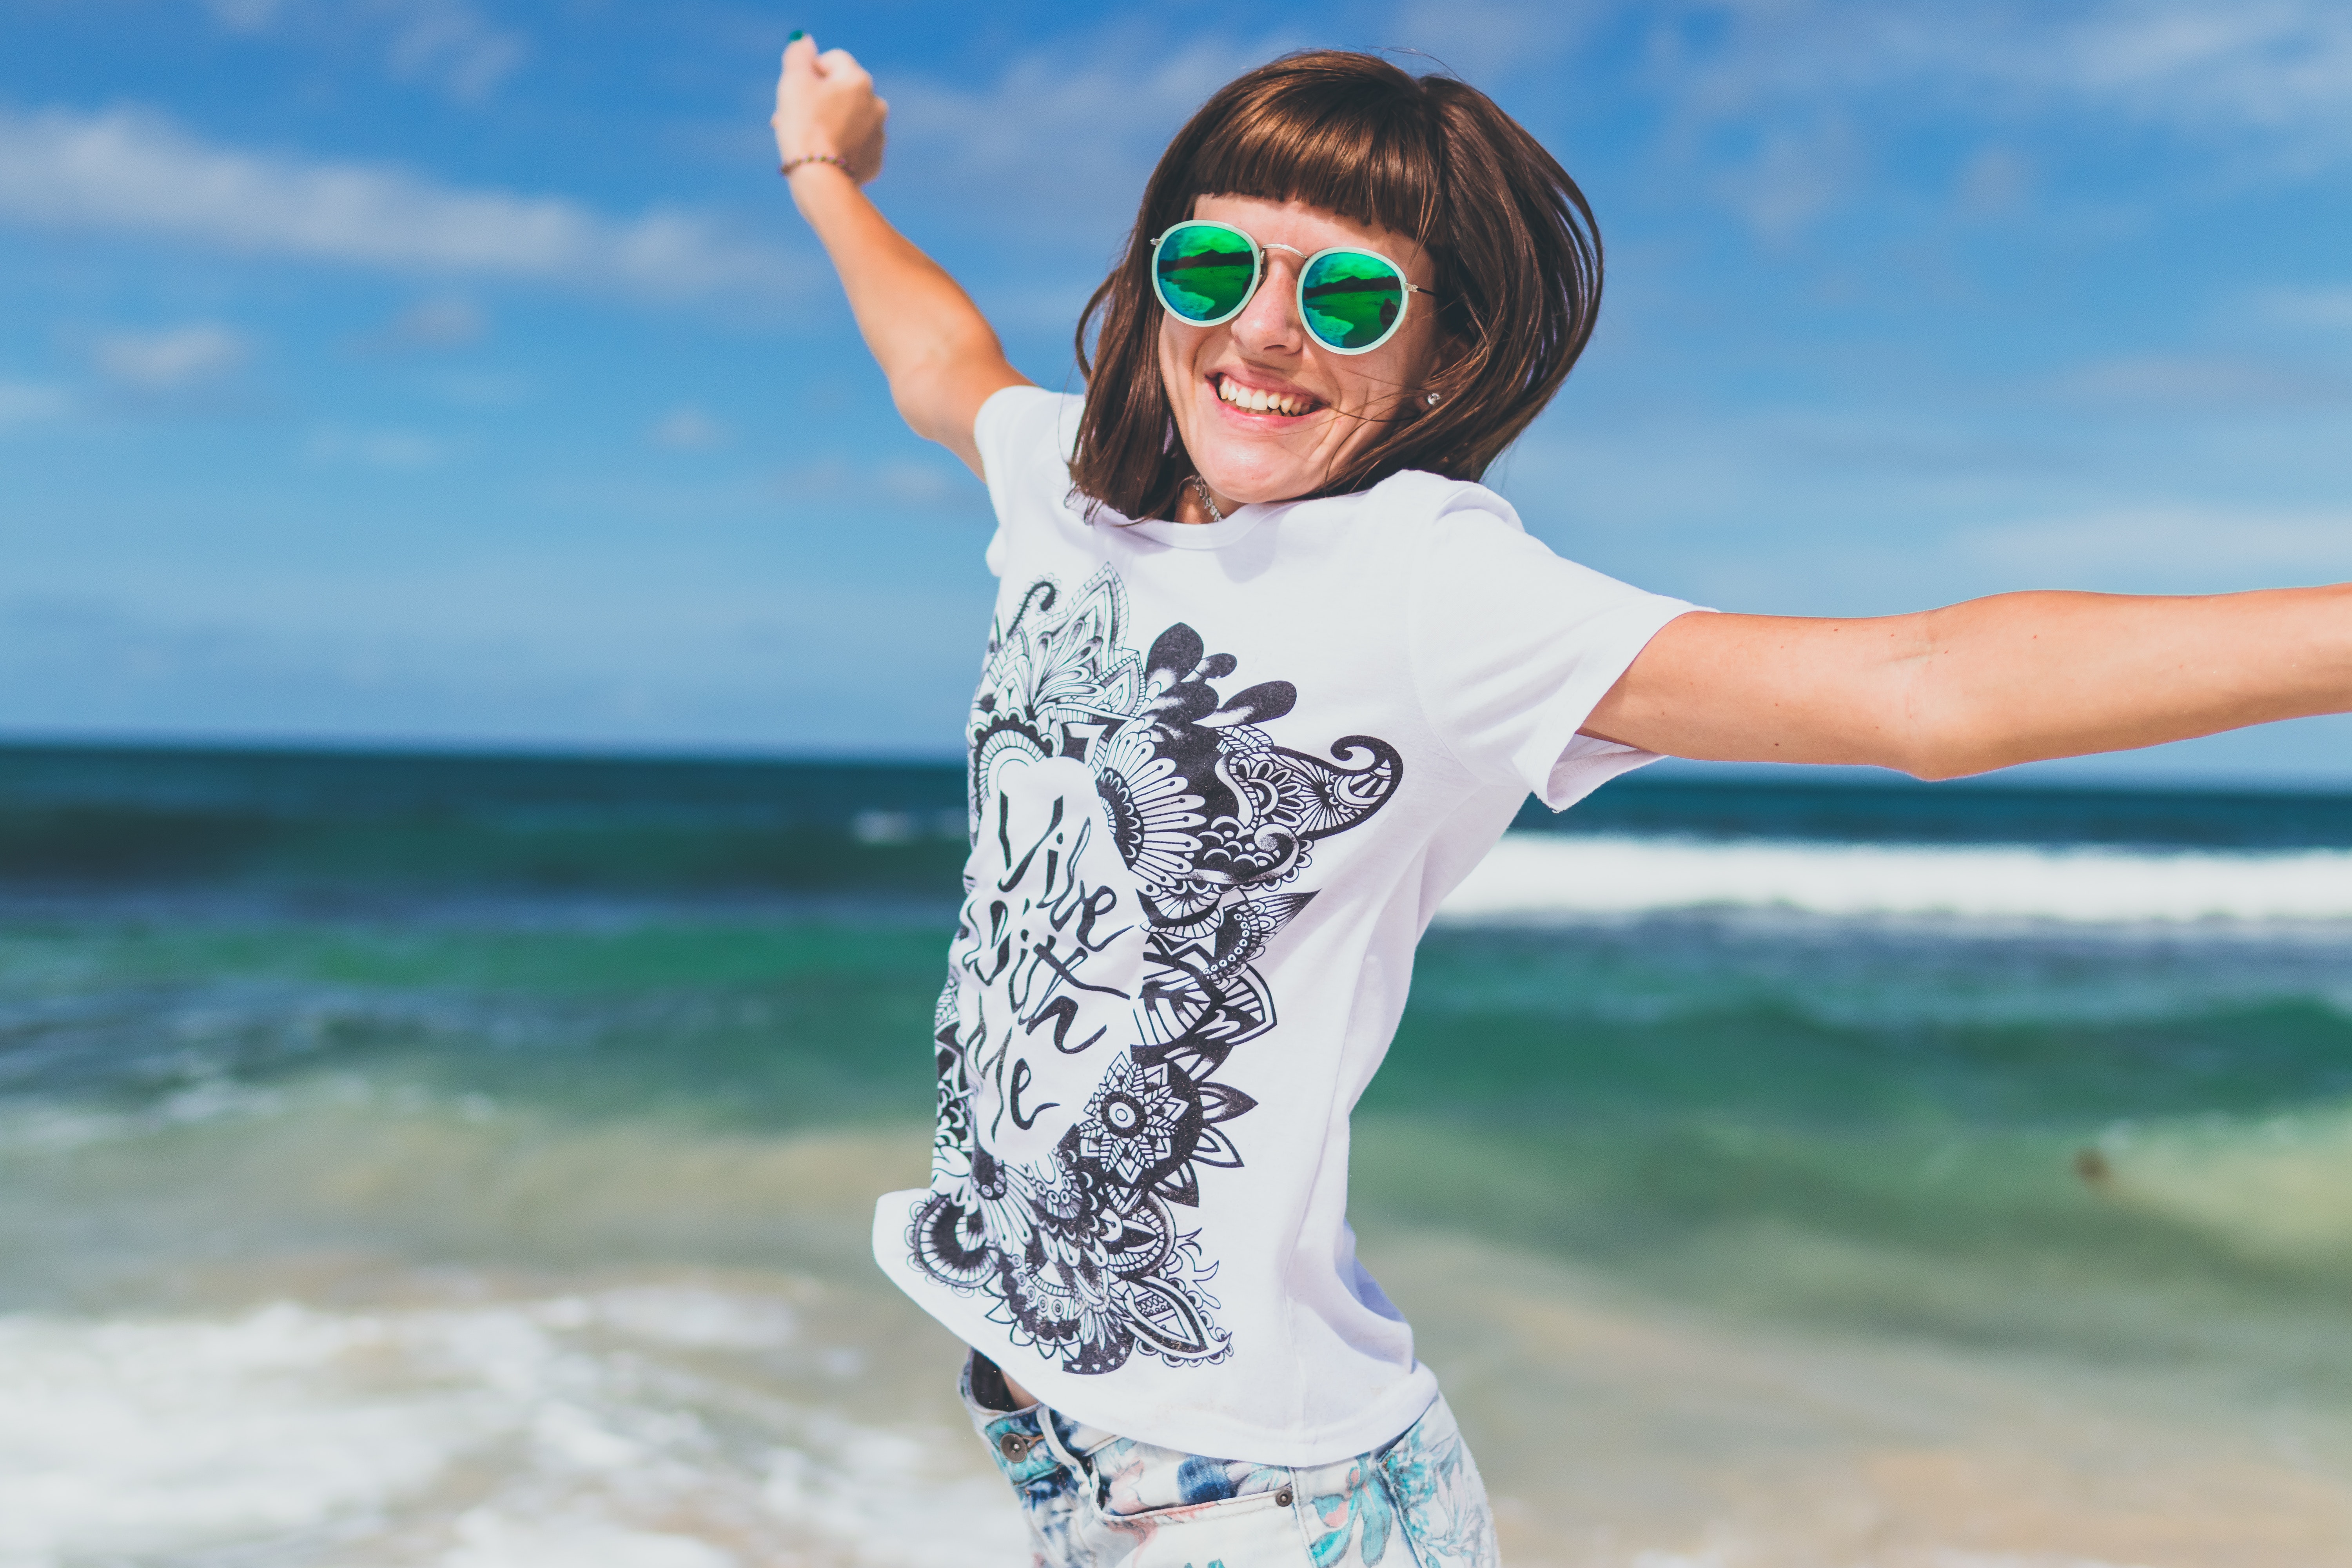 Woman in White and Black T-shirt Lifting Hands Smiling on Seashore, Attractive, Outside, Woman, Waves, HQ Photo